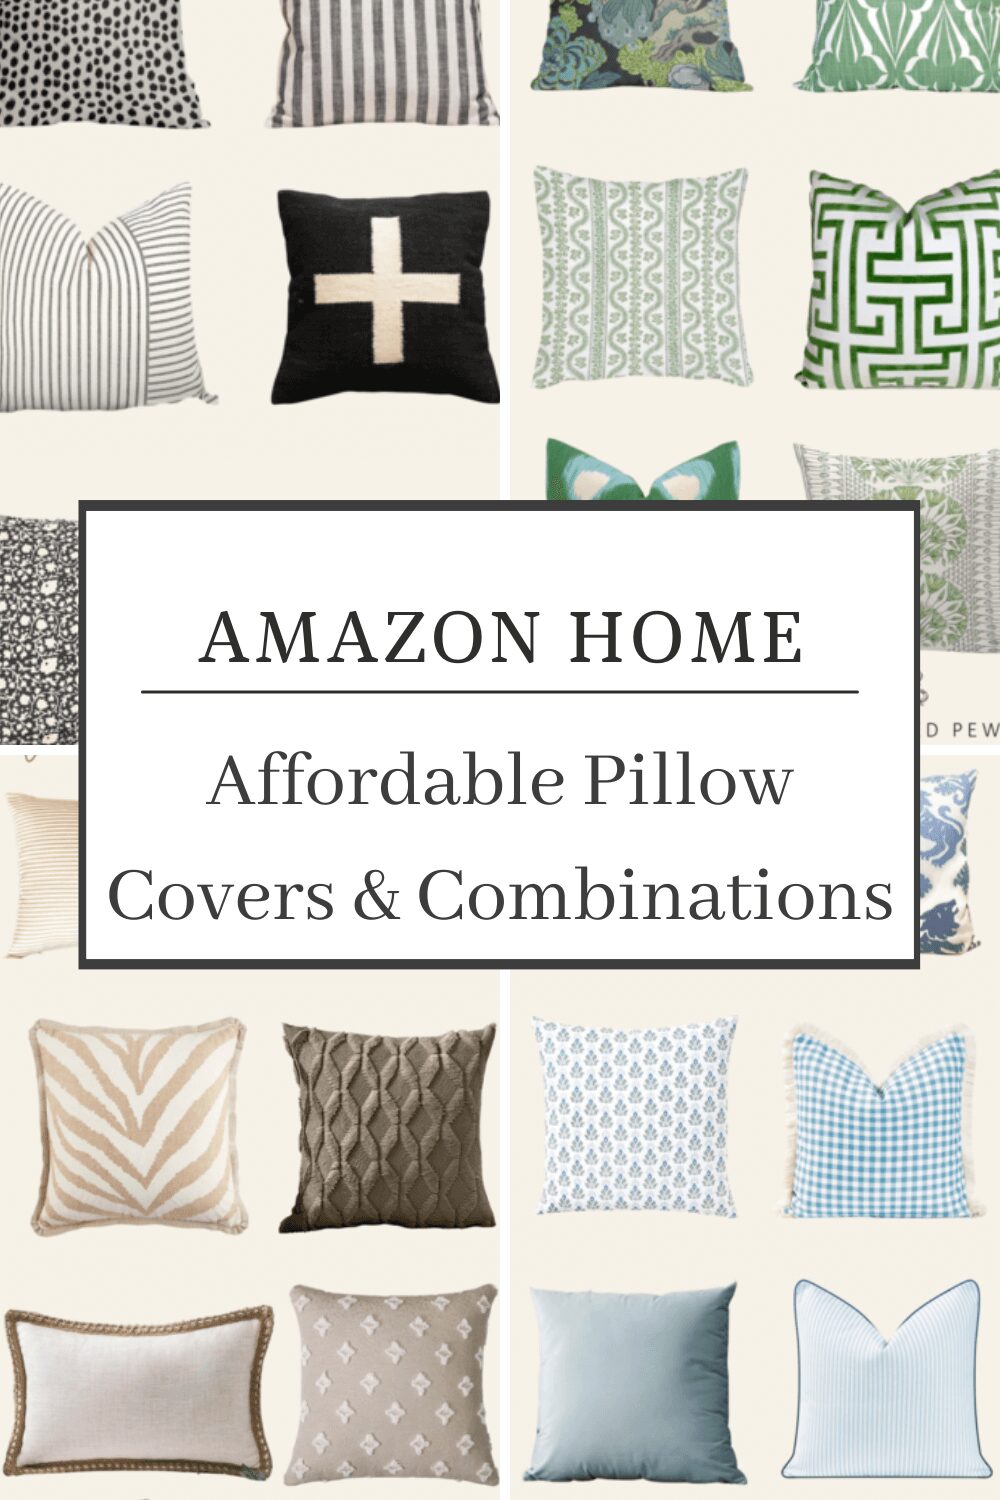 https://www.thetatteredpew.com/wp-content/uploads/amazon-home-affordable-pillow-covers-and-combinations-pin-2-1.jpg